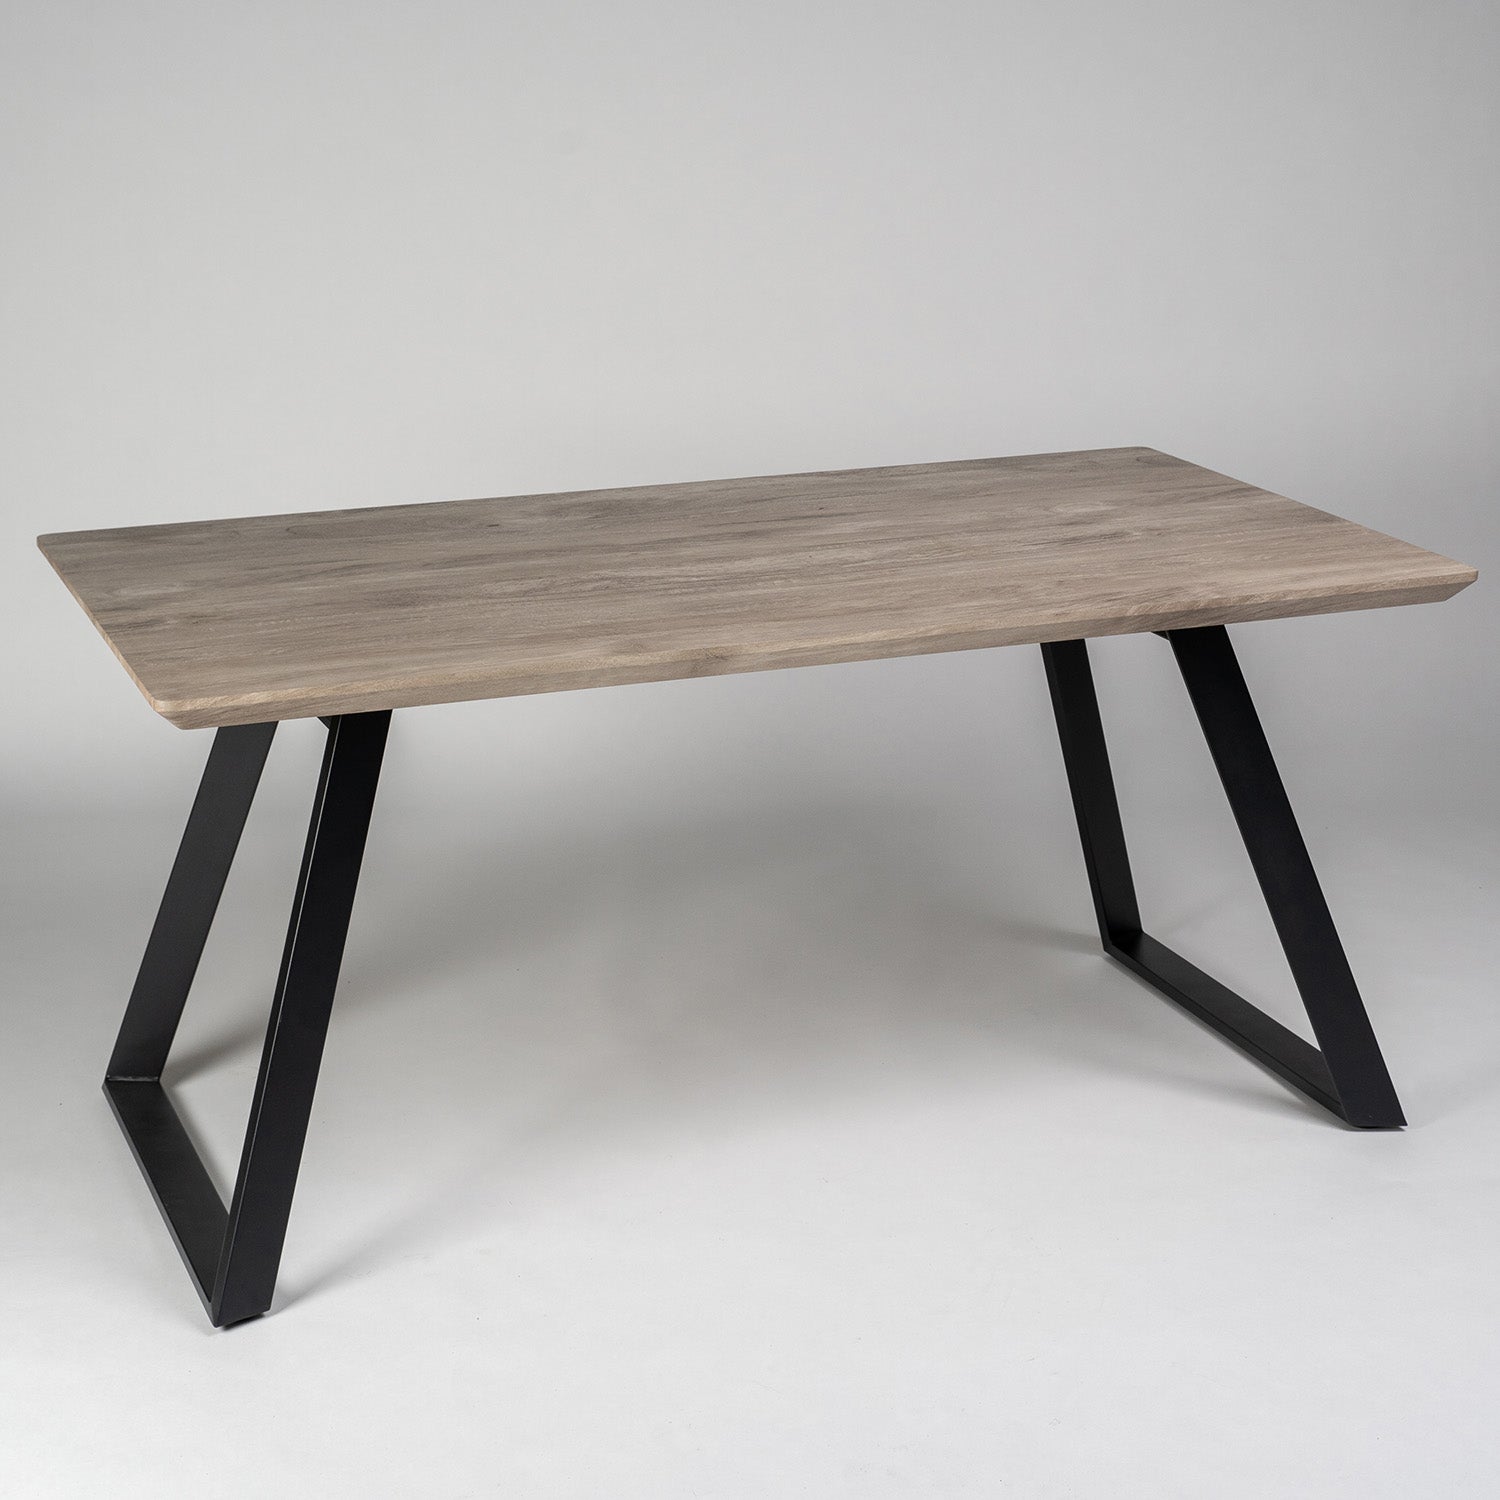 Atlas Wood Effect Dining table - with Black Legs